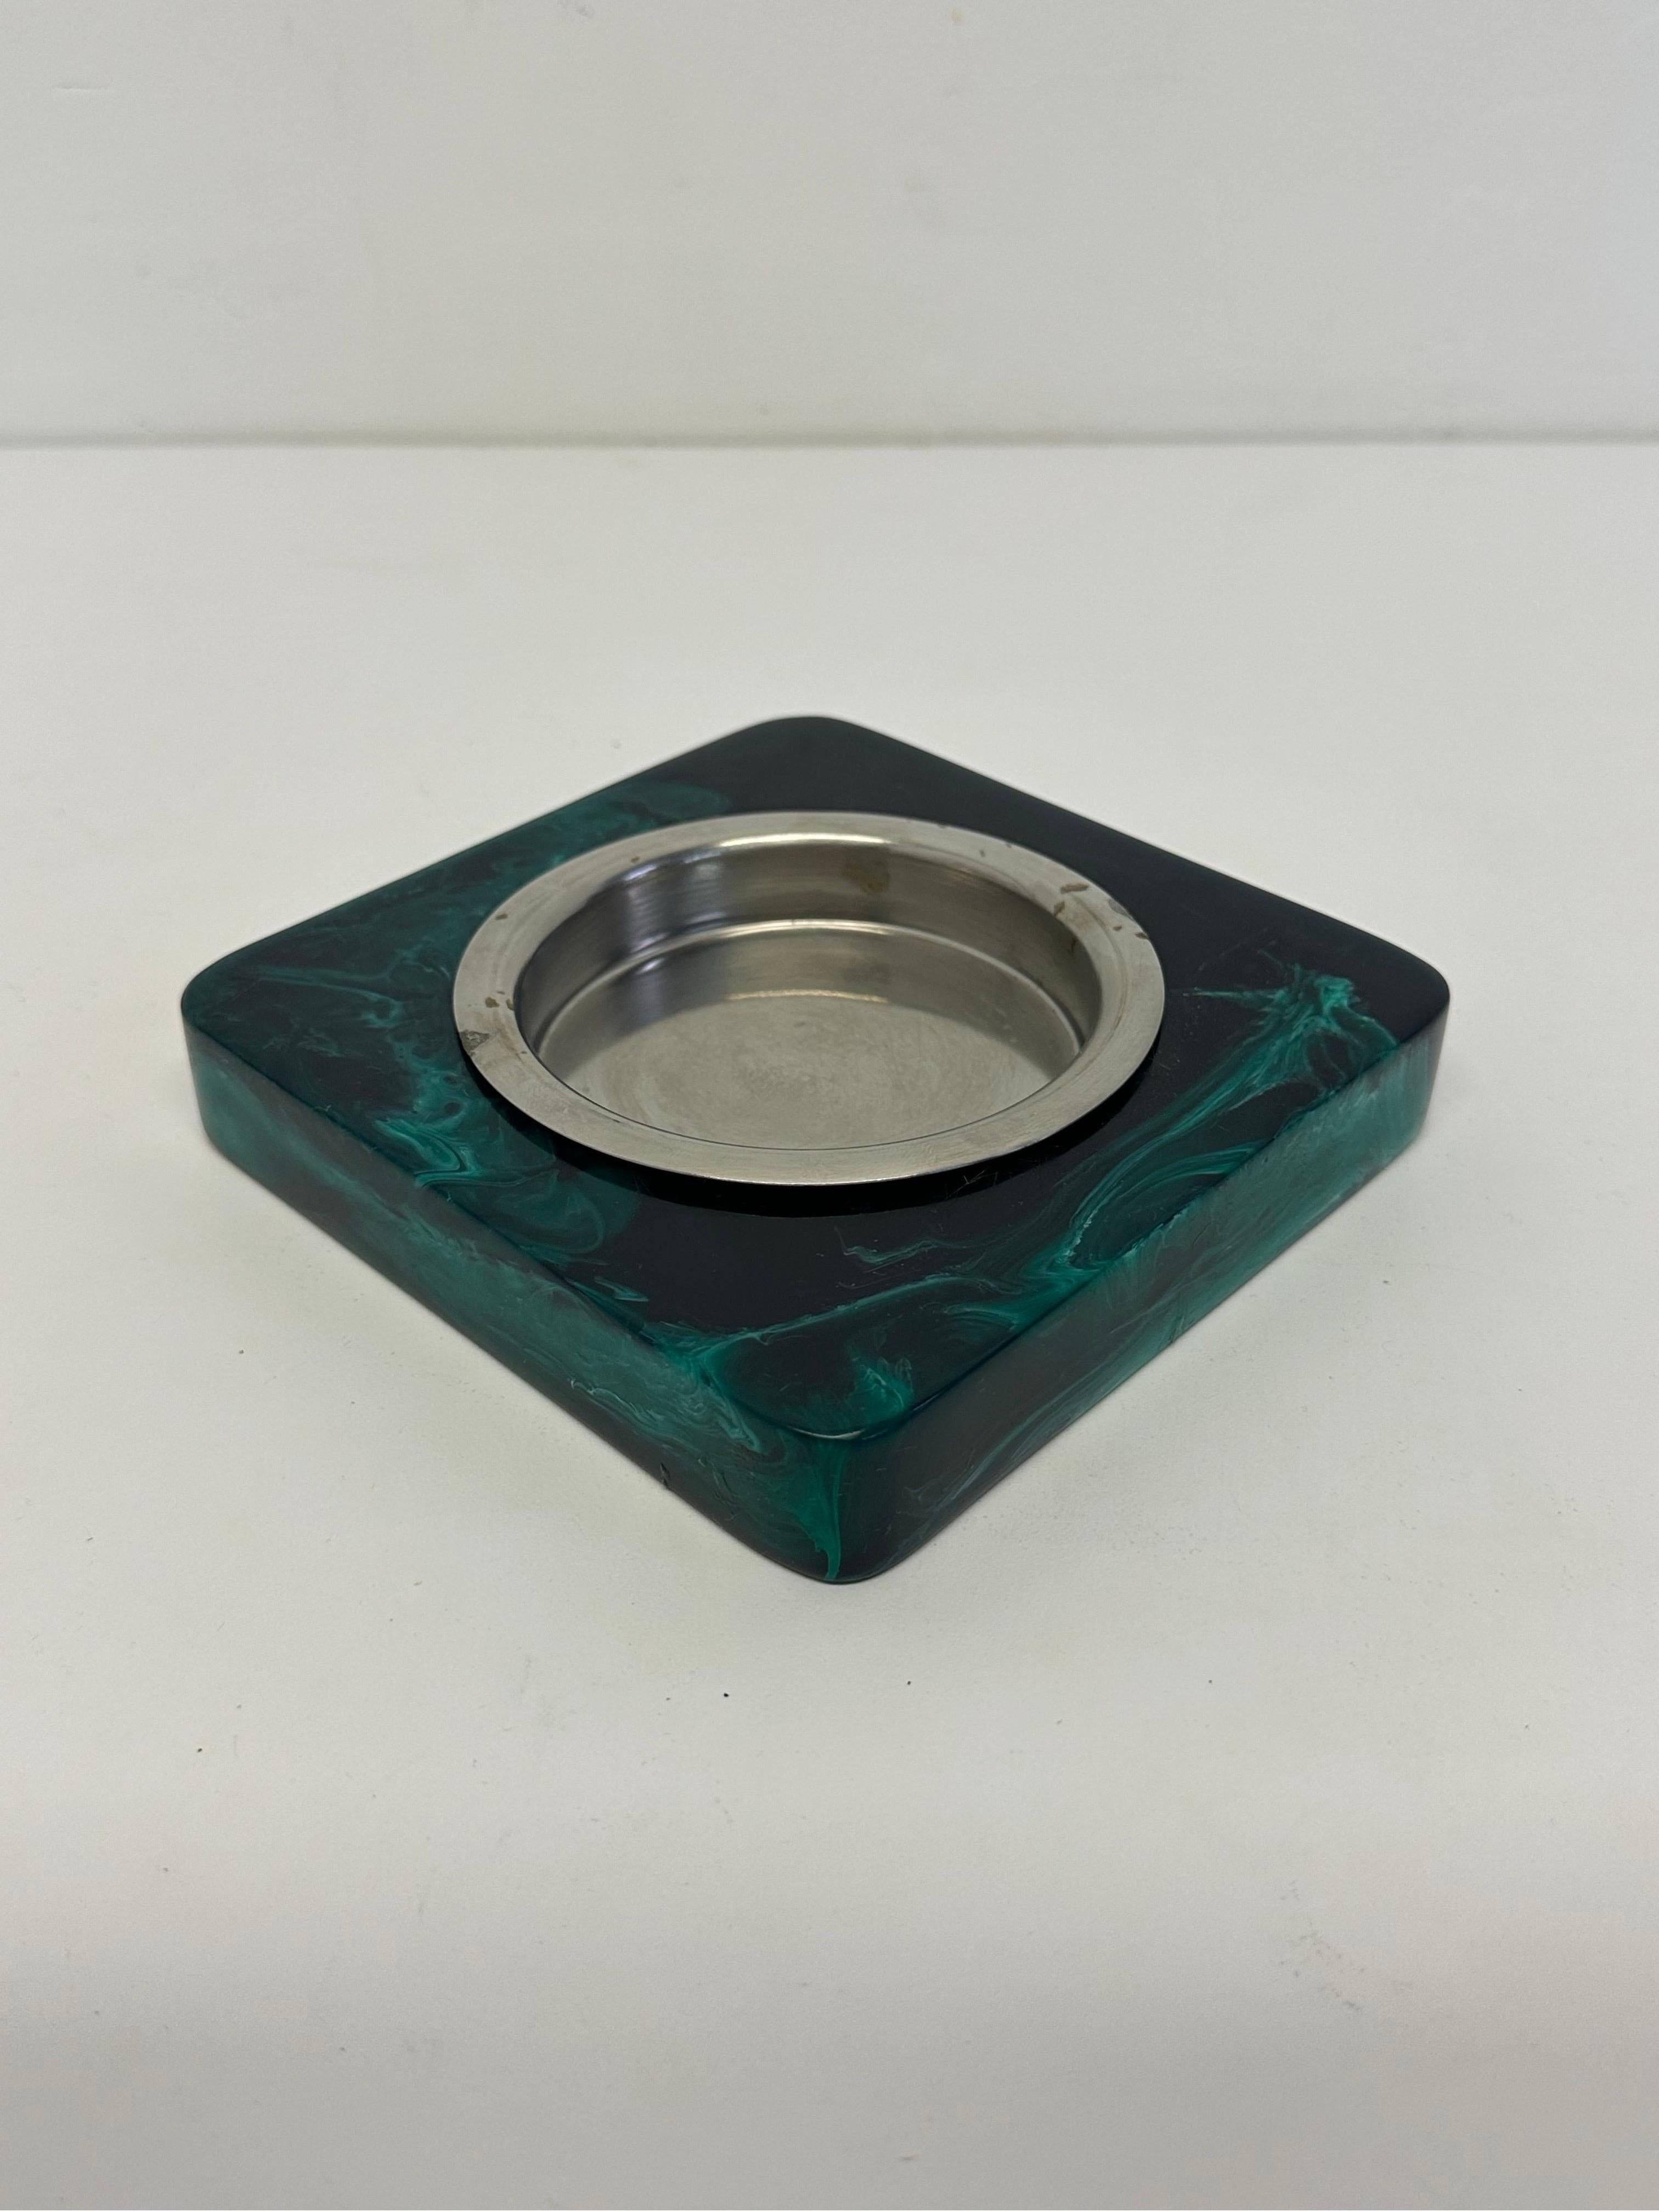 20th Century Brazilian Modern Faux Malachite Resin Tray or Catchall, 1960s For Sale